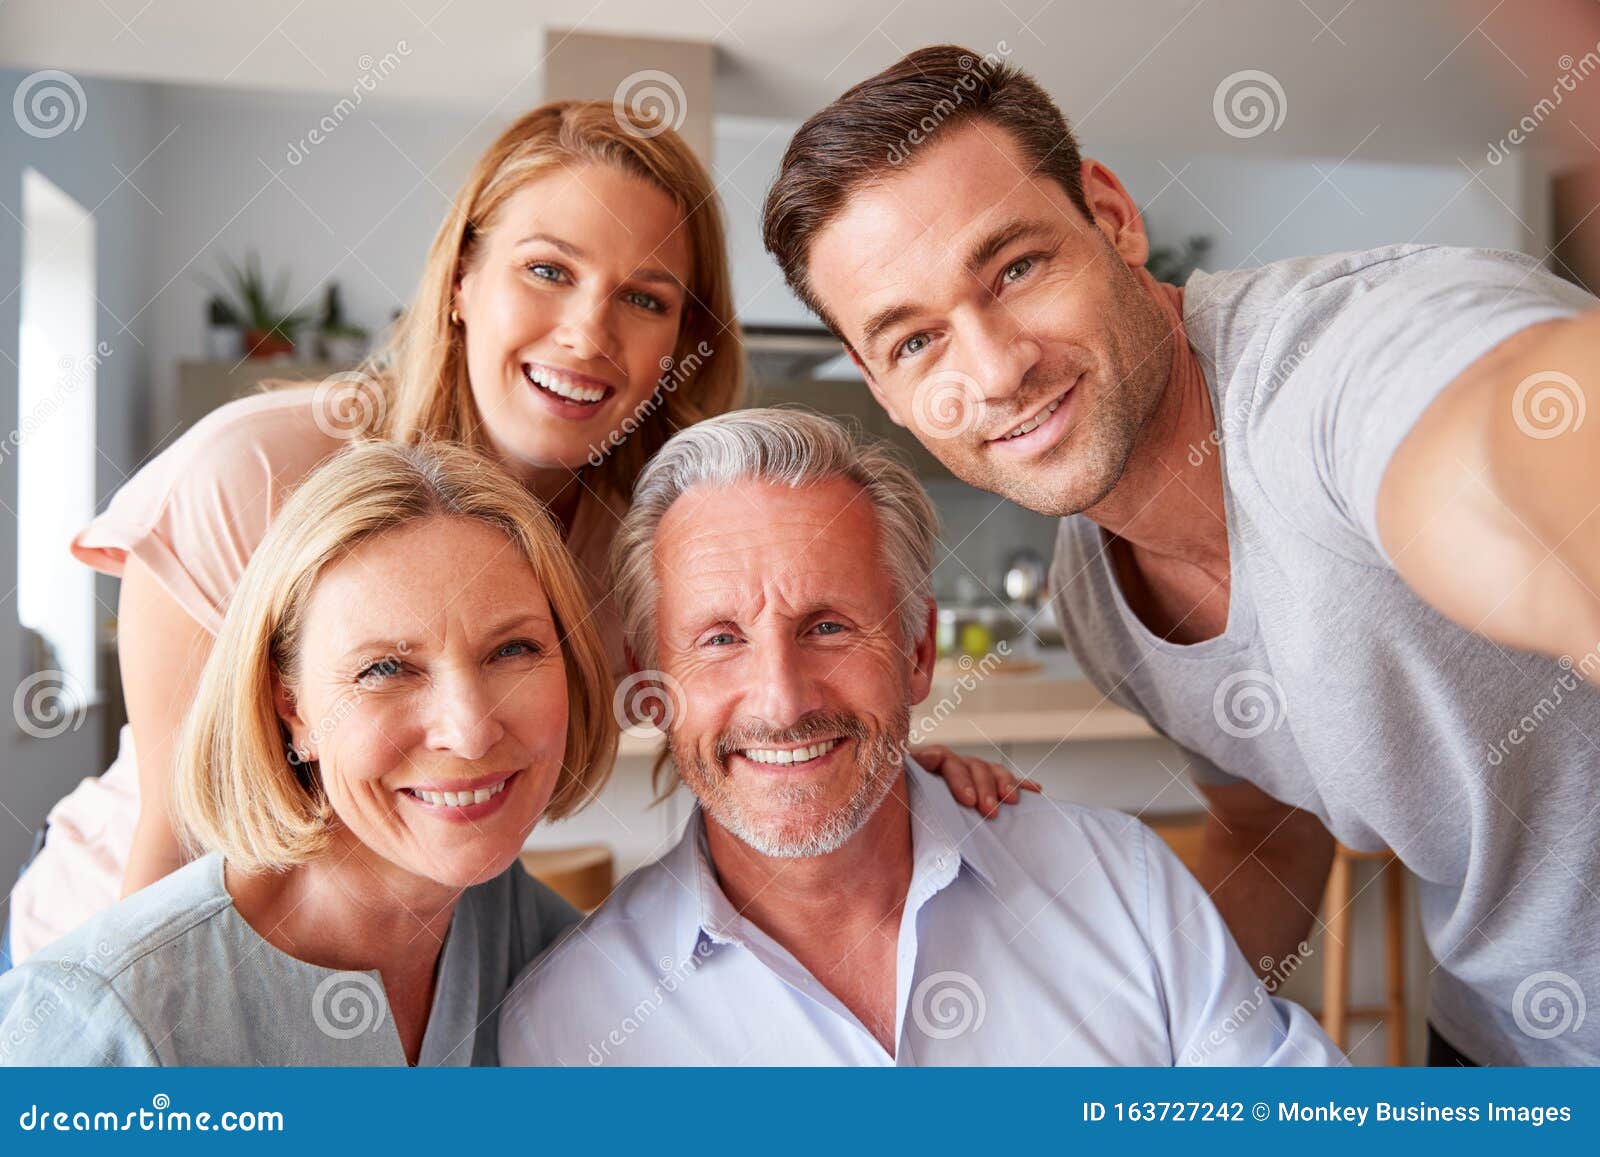 senior parents with adult offspring posing for selfie at home